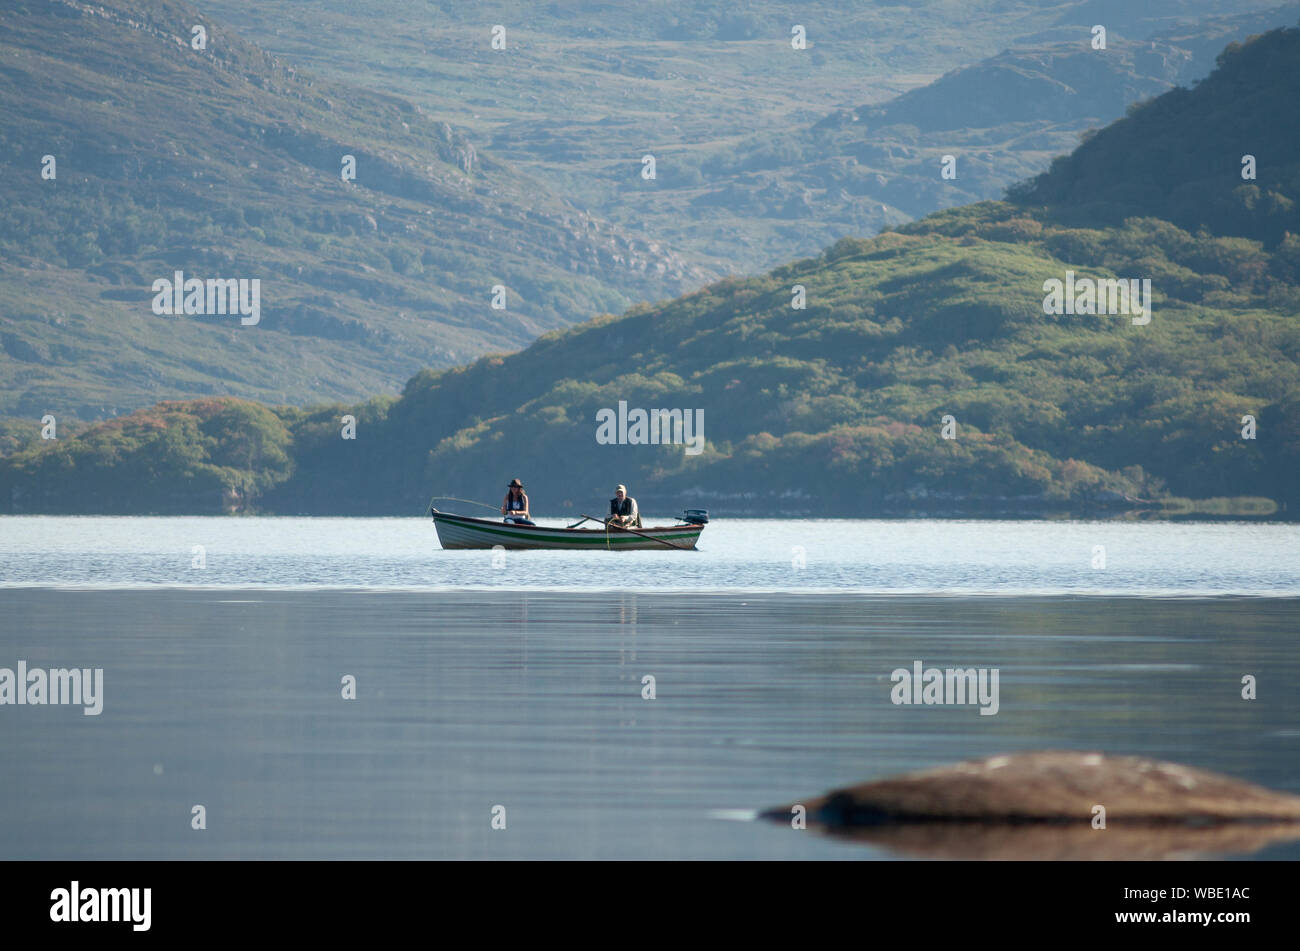 Tranquil view of a carefree couple of fisherman in a row boat fishing in the Lakes of Killarney, Killarney National Park, County Kerry, Ireland. Stock Photo